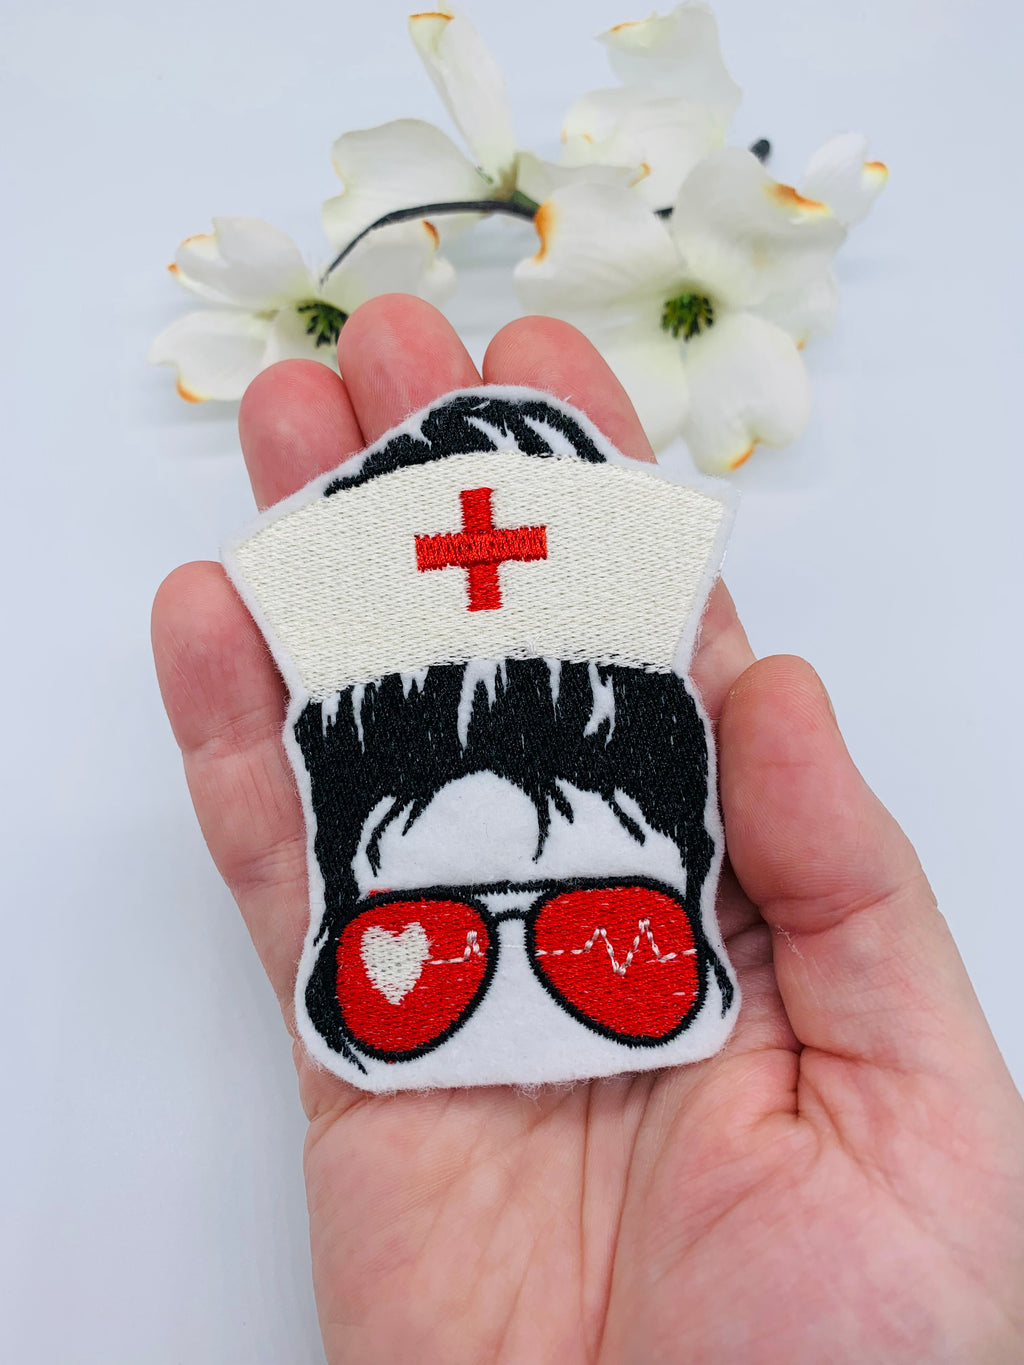 Raven haired nurse Patch